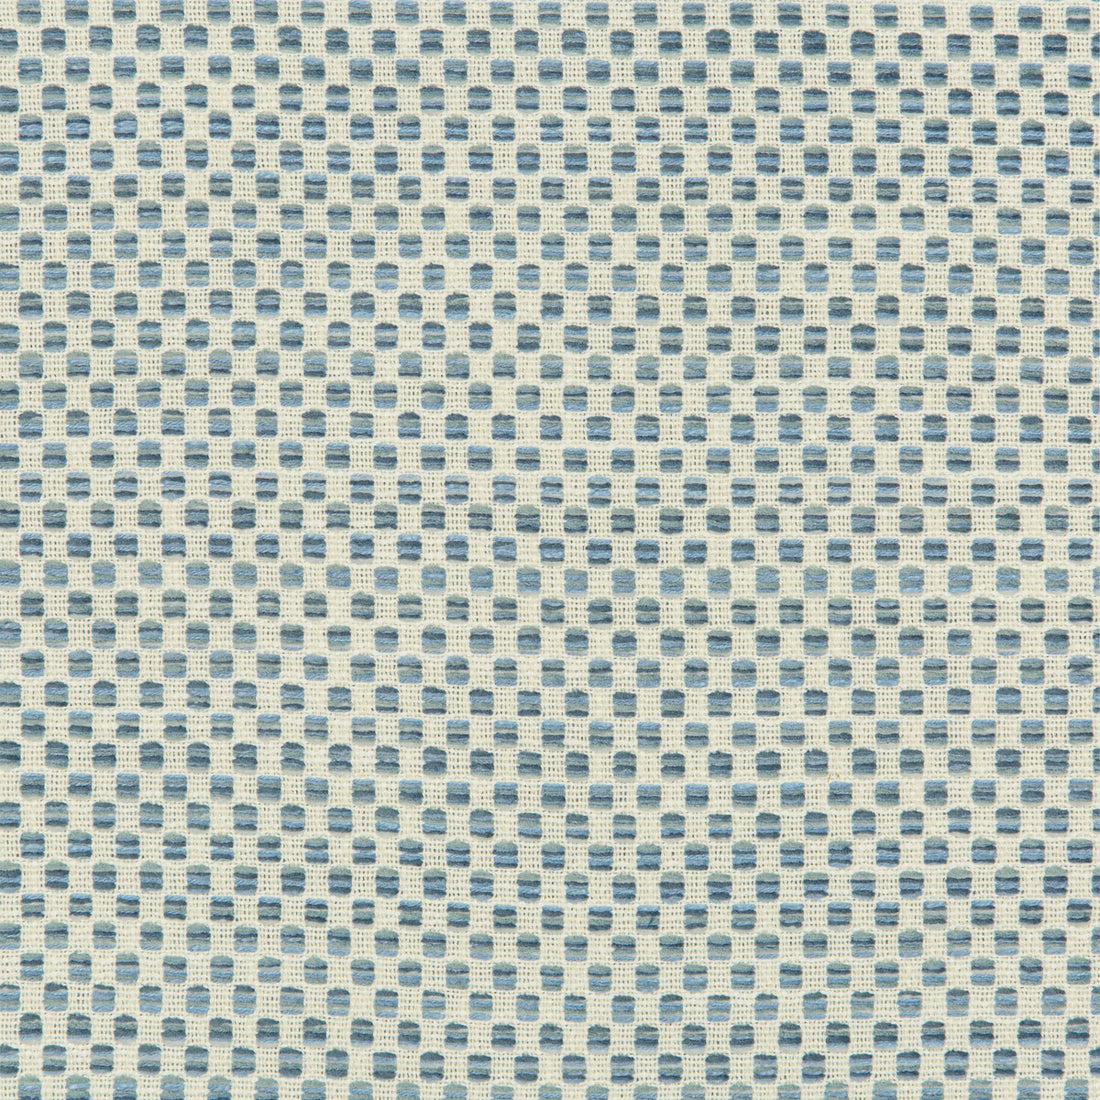 Kravet Design fabric in 36090-5 color - pattern 36090.5.0 - by Kravet Design in the Inside Out Performance Fabrics collection